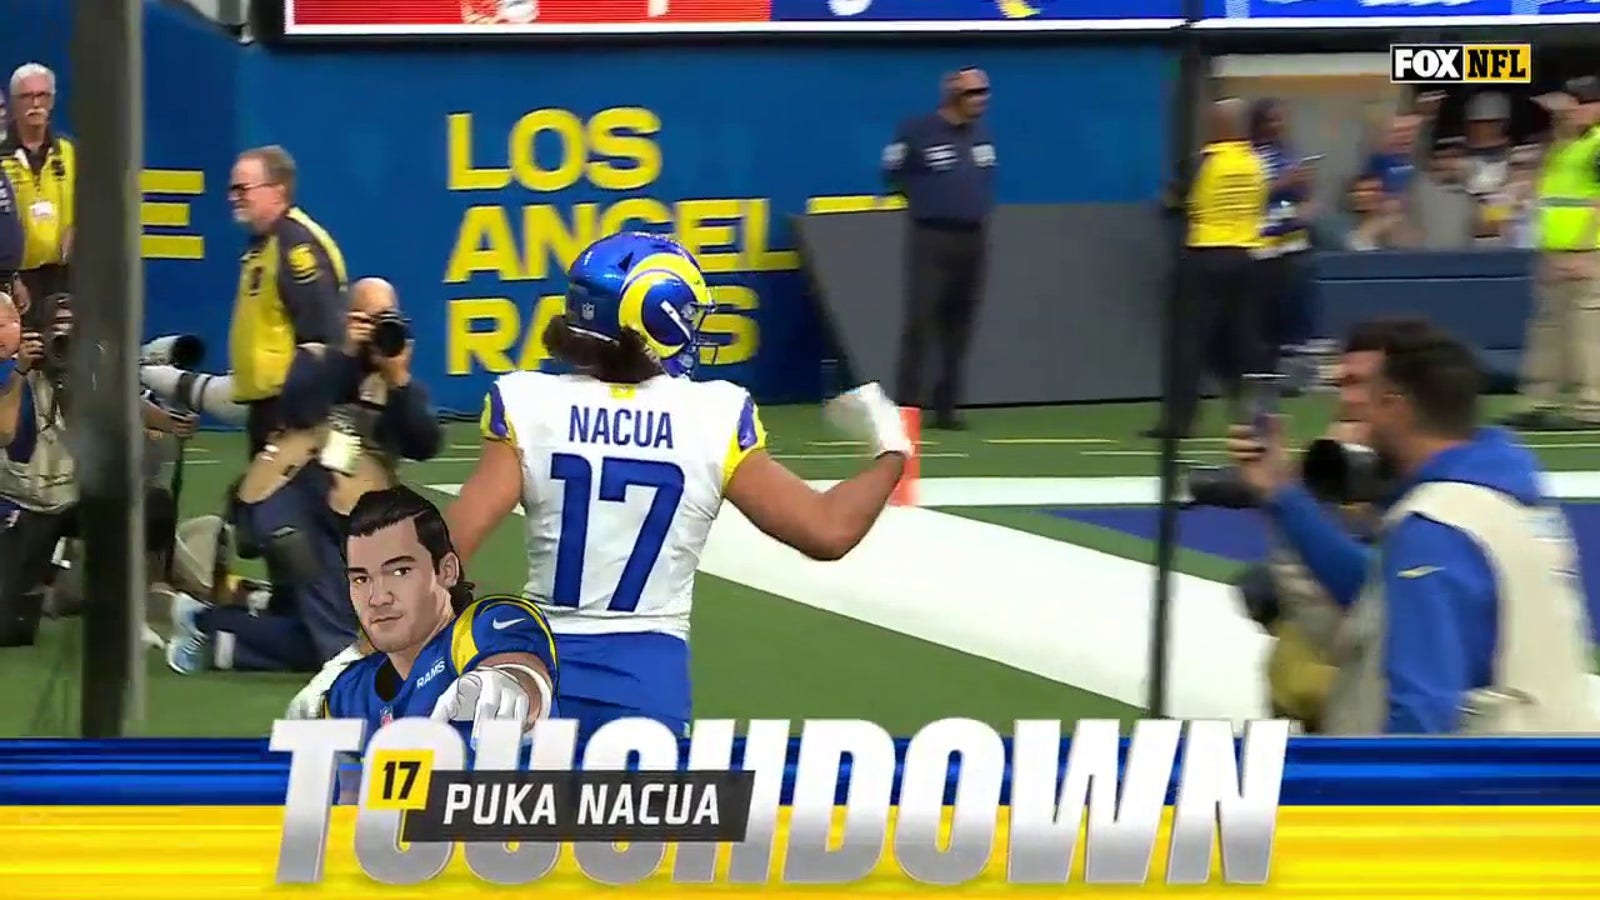 Matthew Stafford links with Puka Nacua for a 70-yard TD to give Rams a lead against Browns